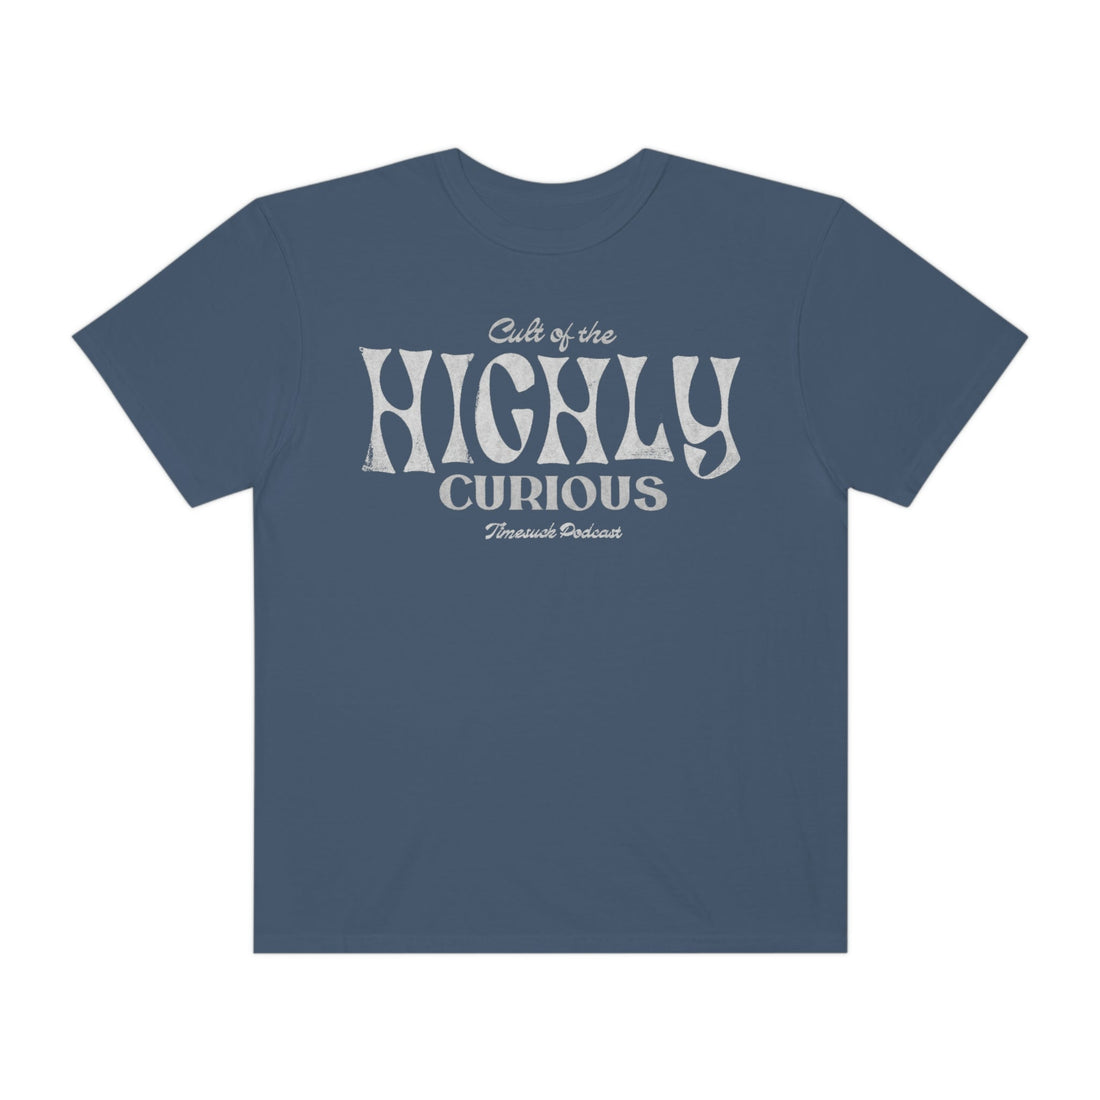 Highly Curious Vintage Tee